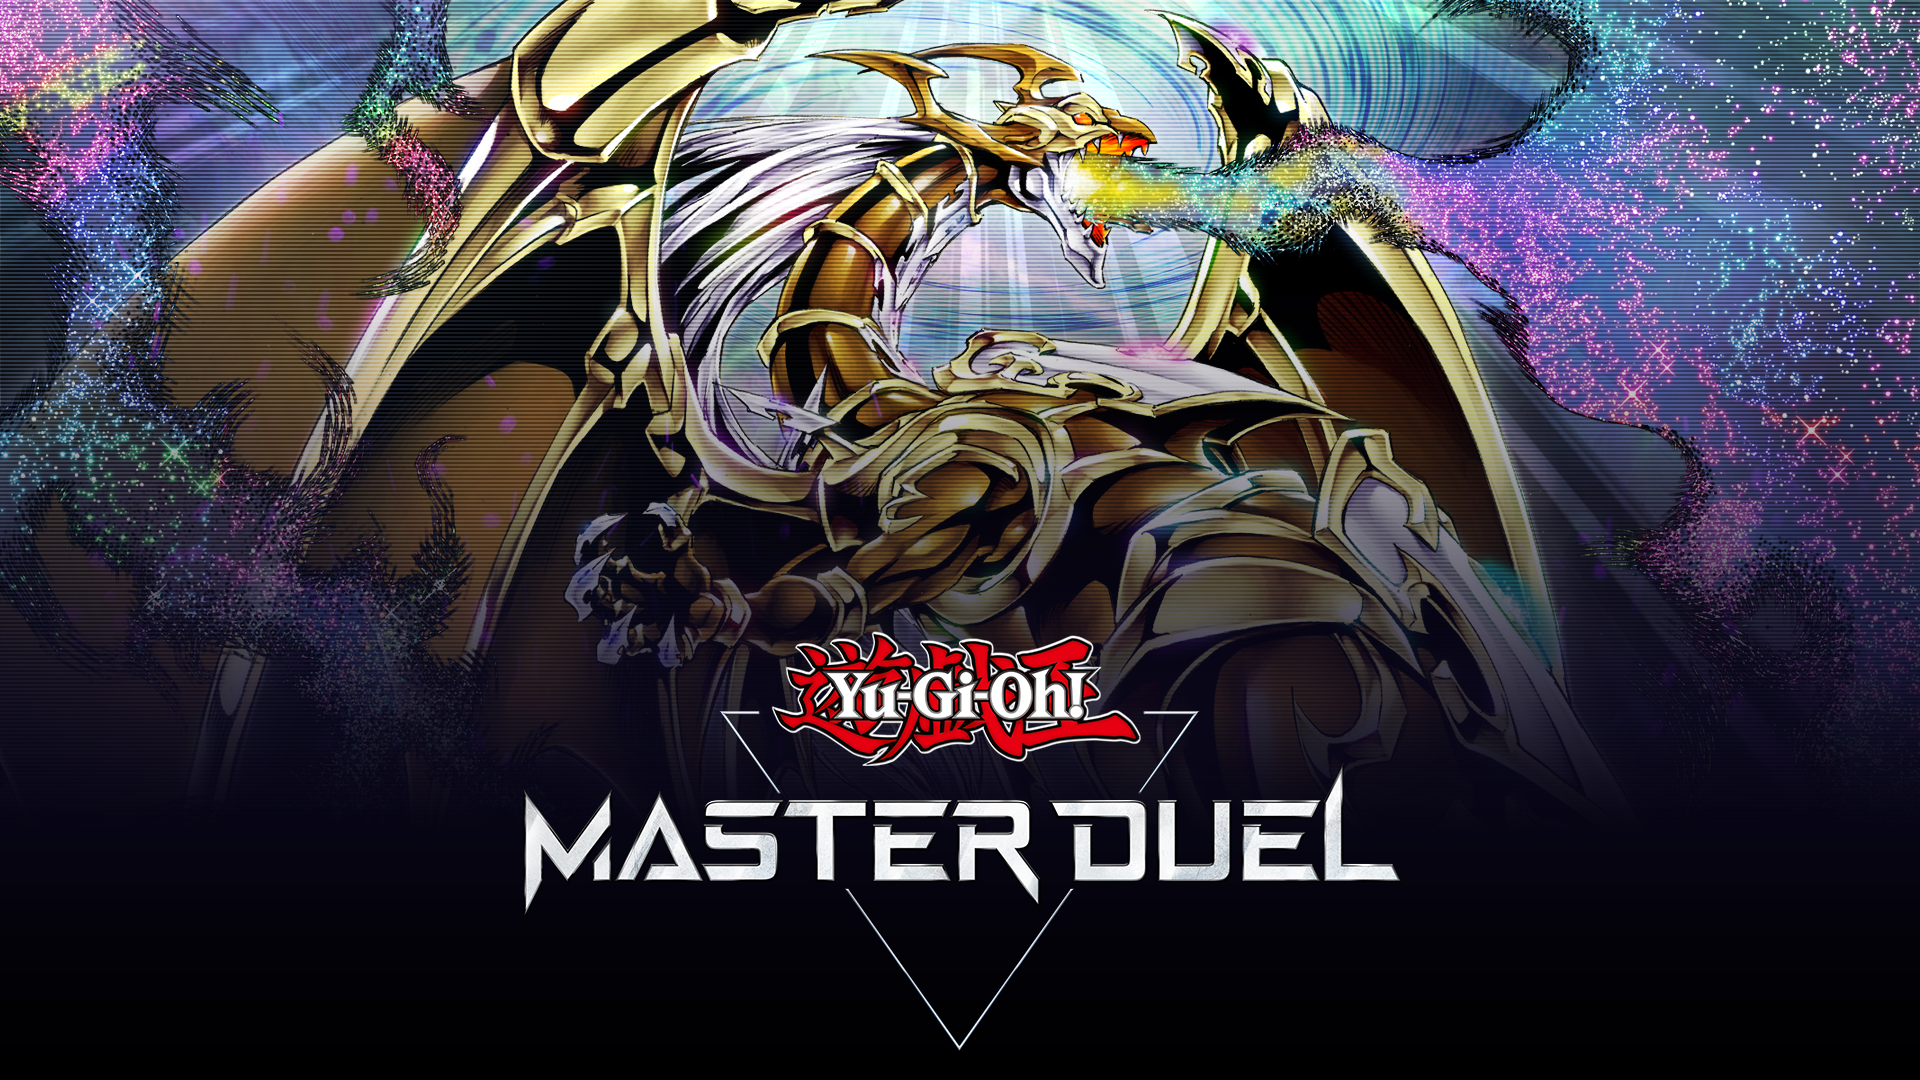 Welcome to MASTER DUEL